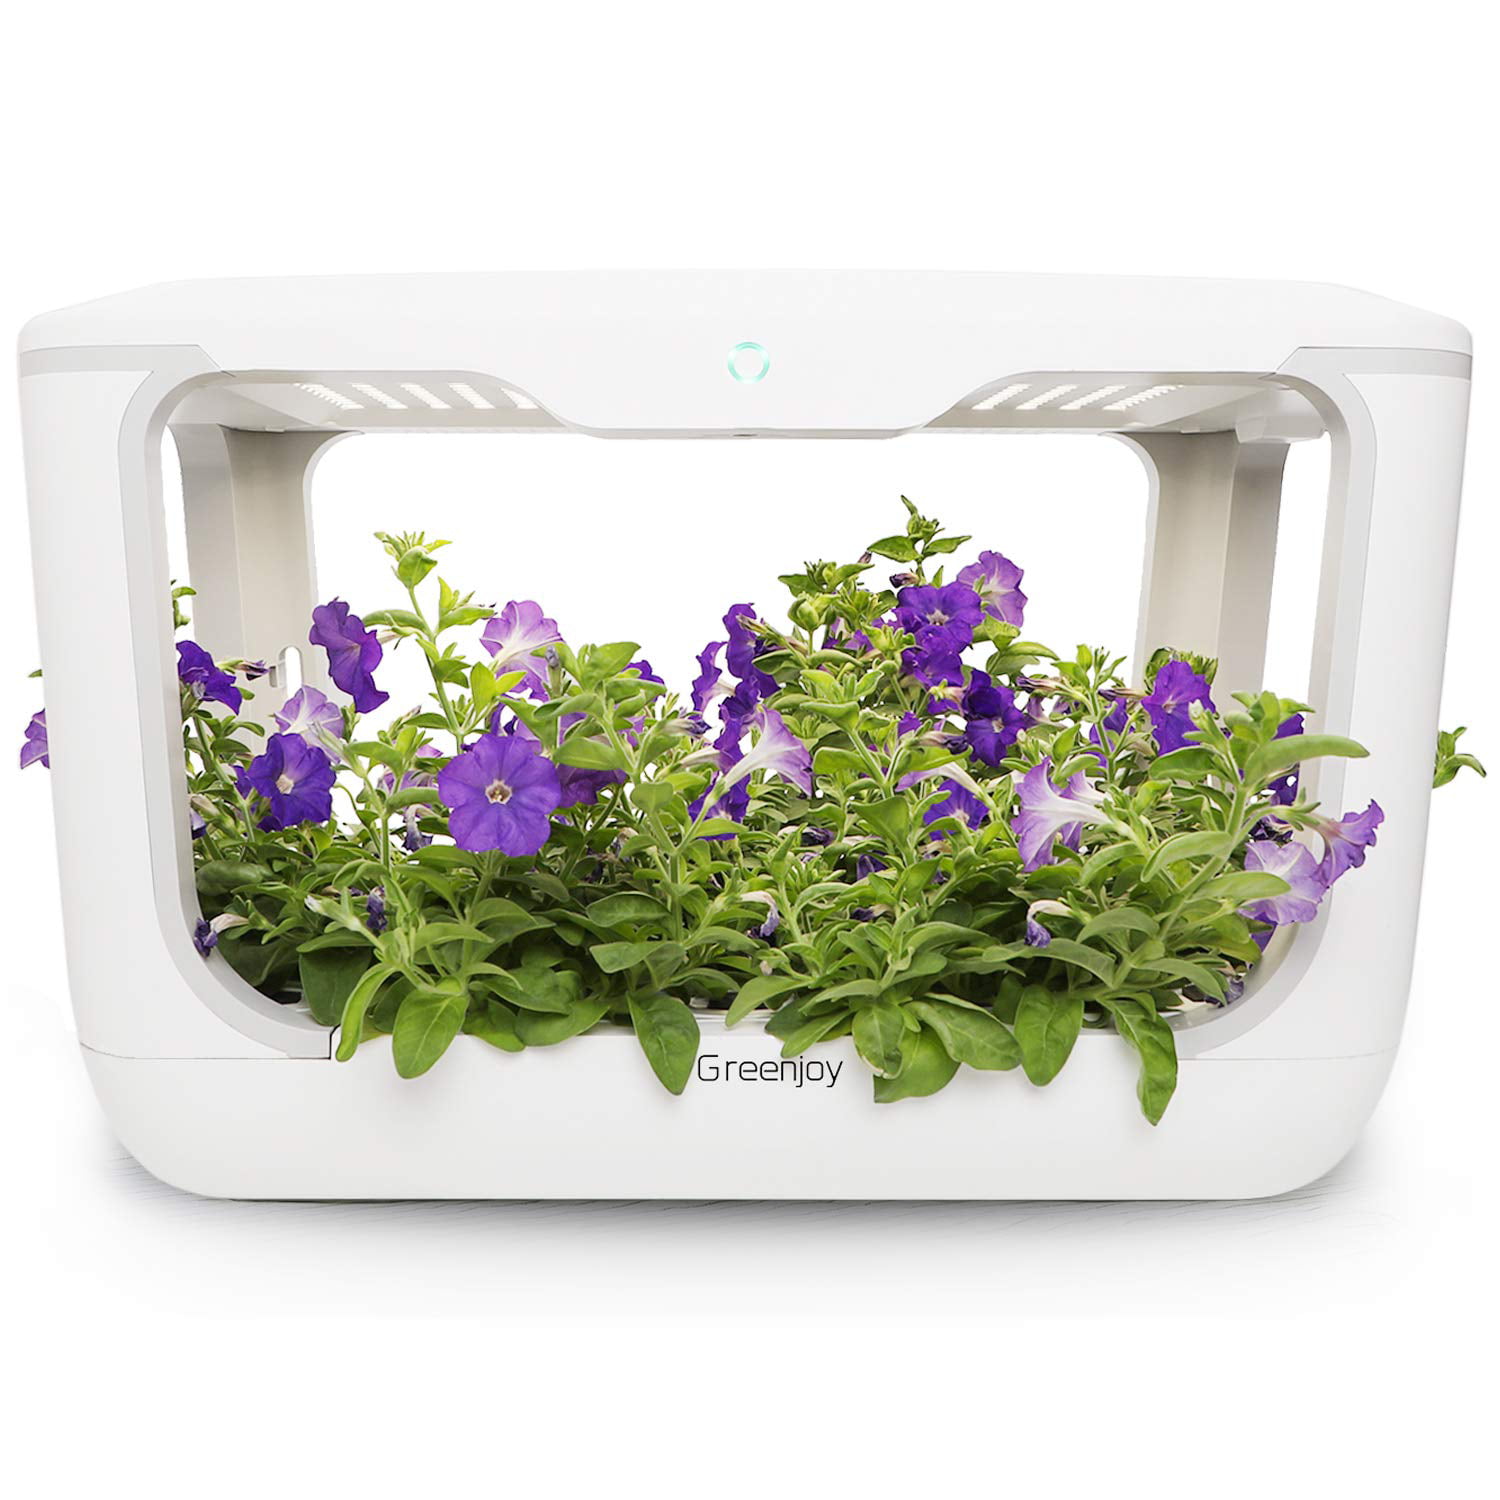 Greenjoy Indoor Herb Garden Kit Plant Germination Kits 8l Water Tank for Herbs for sale online 